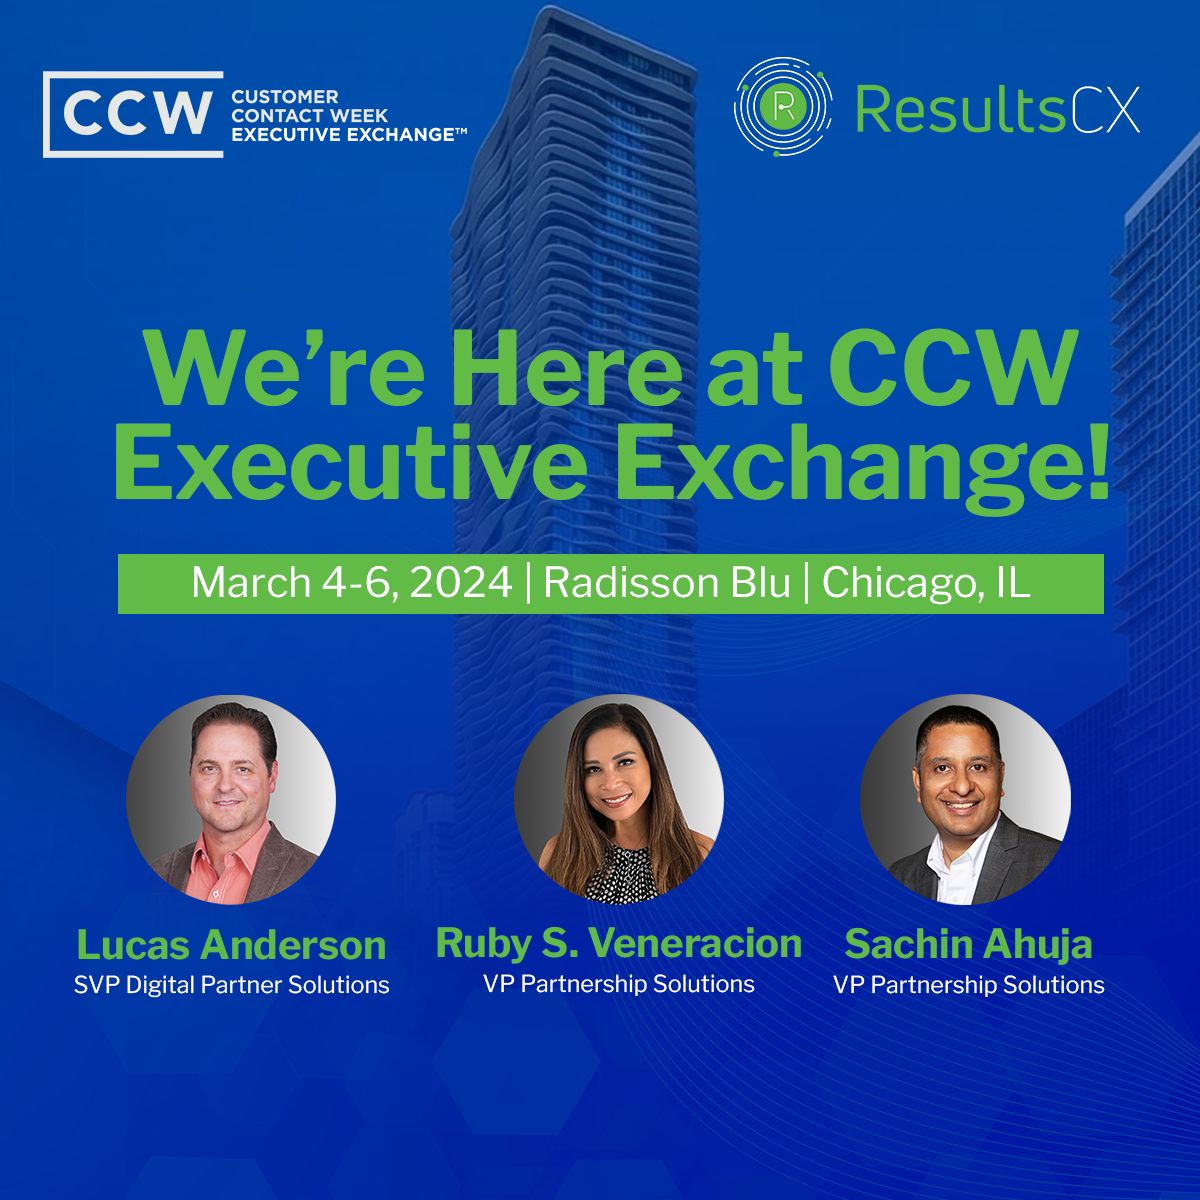 Day 1 at the CCW Executive Exchange in Chicago! 💥We’re learning from experts and panelists on customer support solutions and strategies.
Connect with our execs for digital cx insights that boost customer experience.
#DigitalCX #CX #InnovateCX #CCWExchange